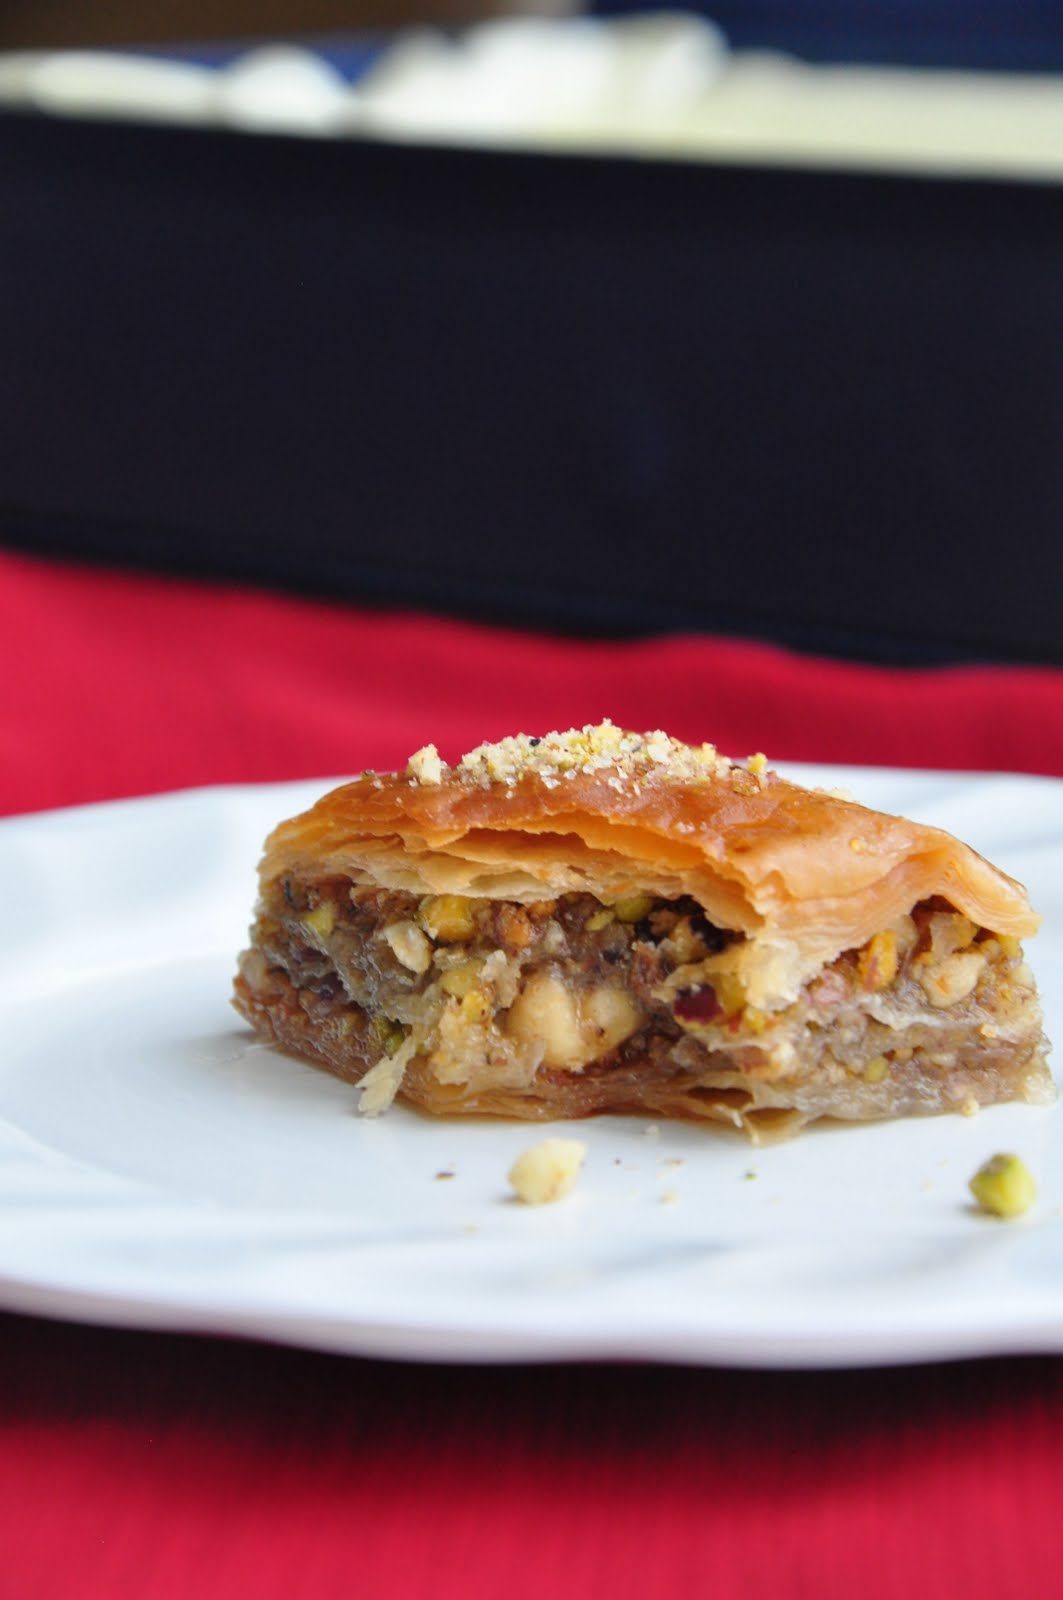 Served with love: Baklava